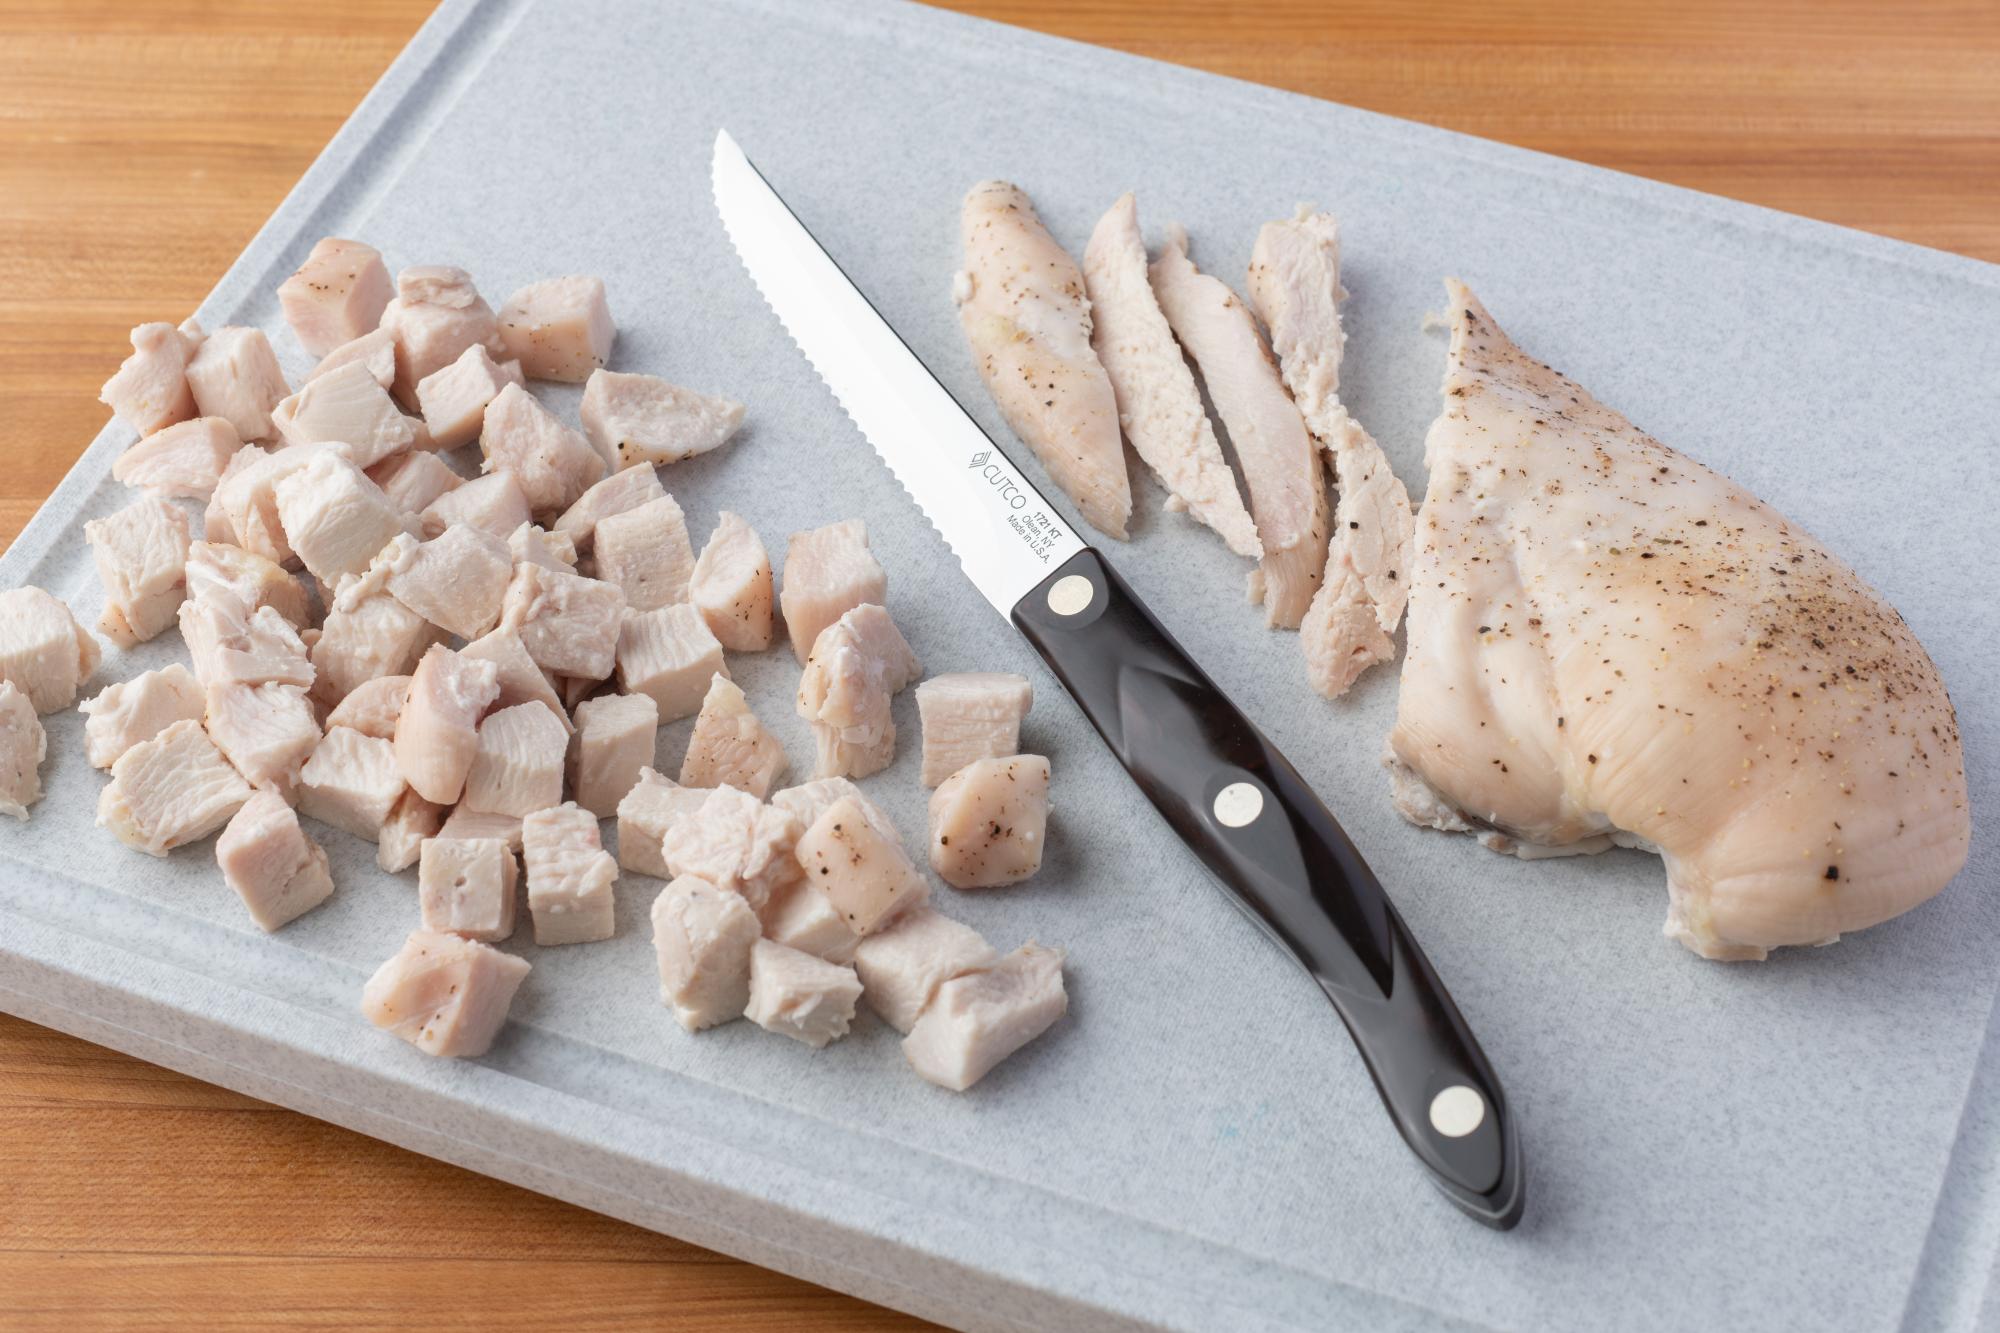 Use the Trimmer to cut the chicken into bite size pieces.